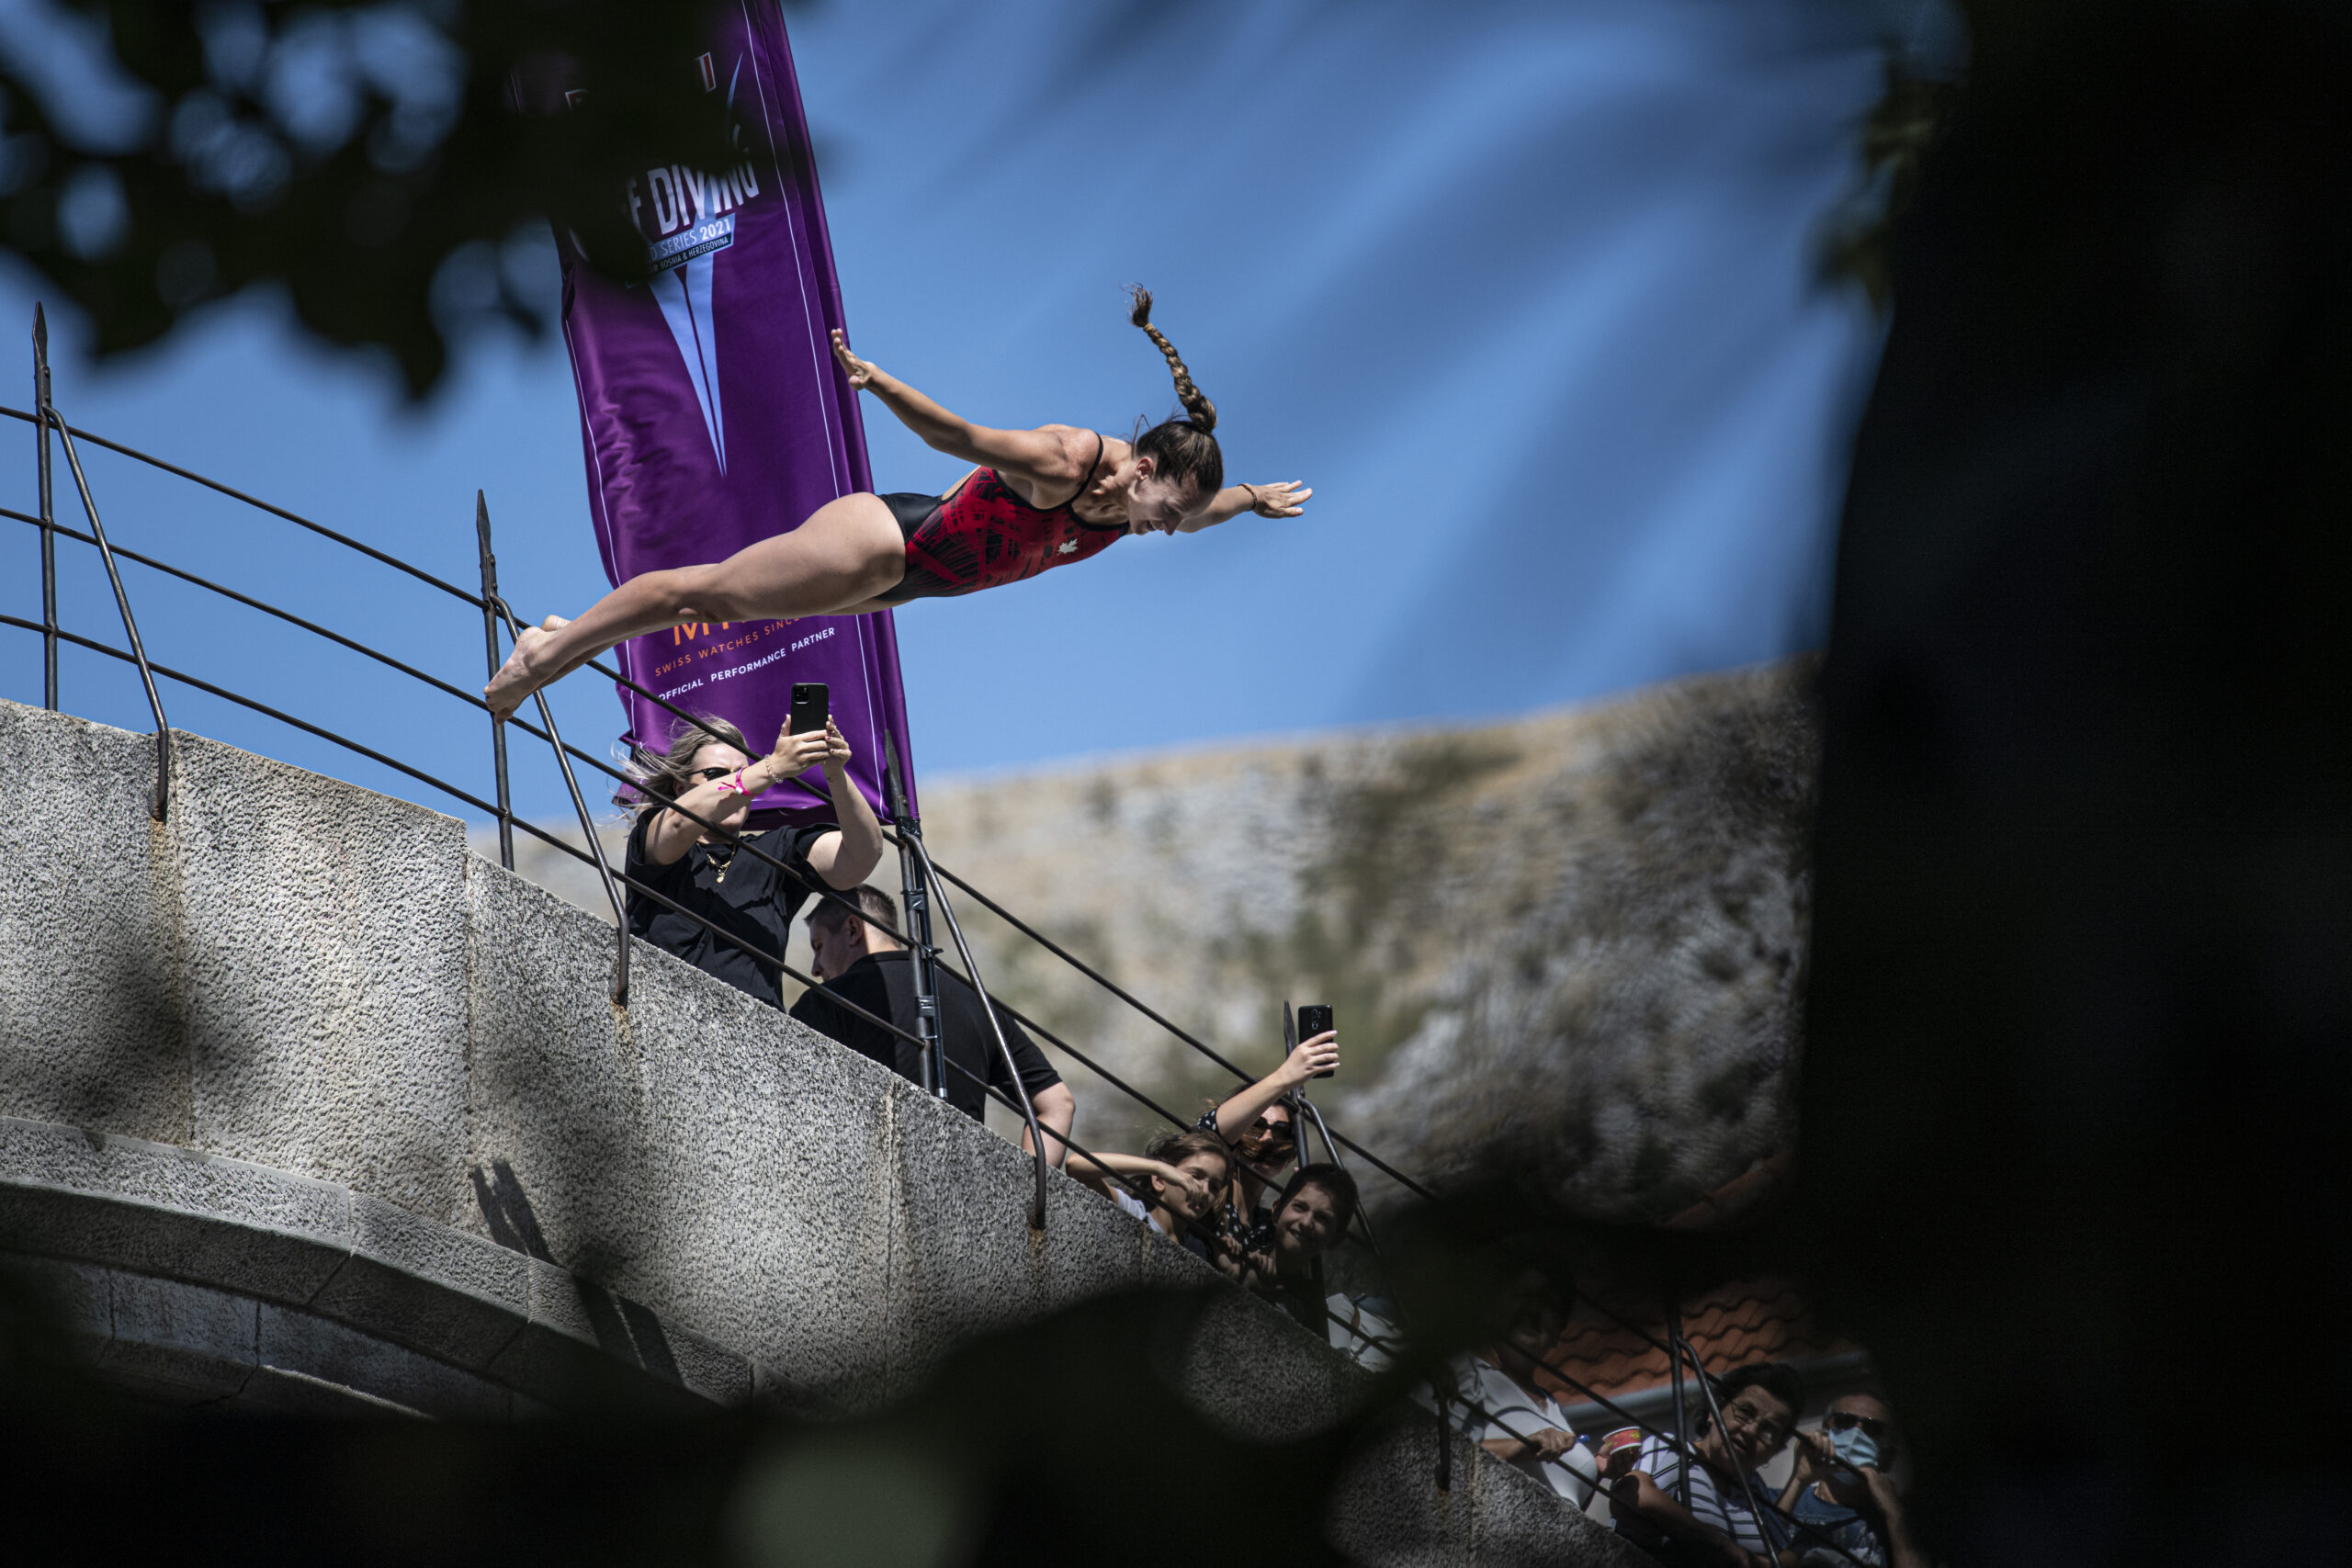 Macaulay finds podium, Carlson sixth at Mostar stop on the Red Bull Cliff Diving World Series